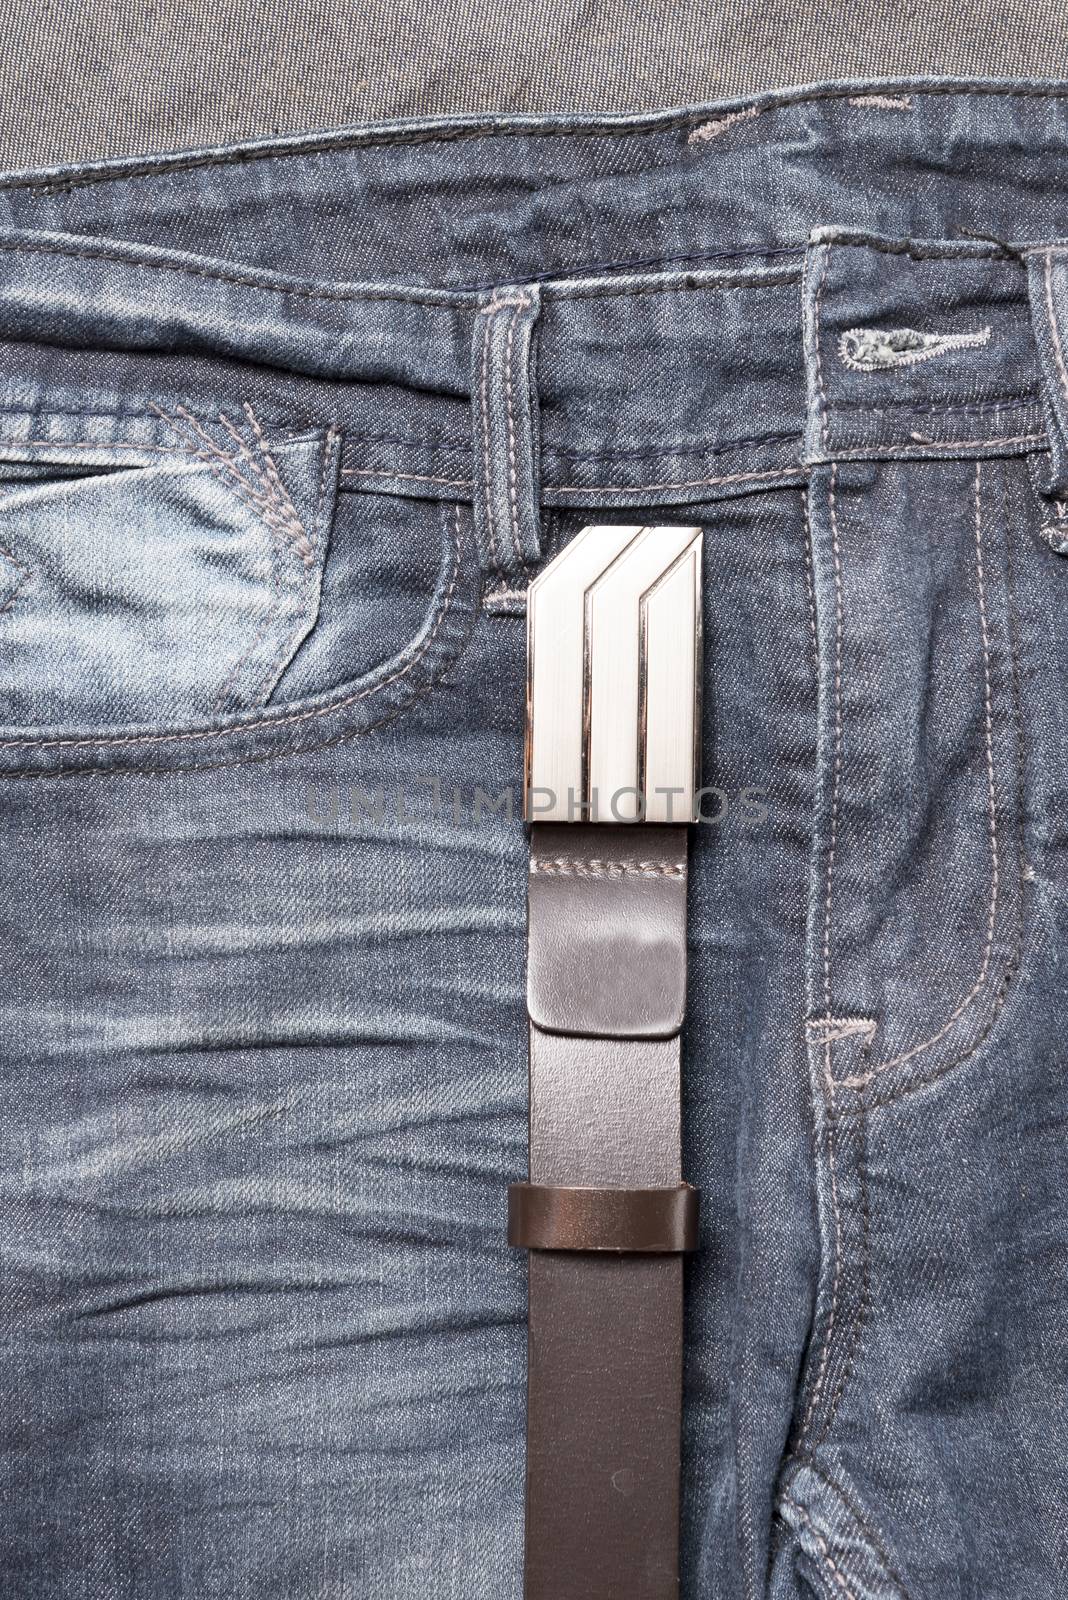 jean and leather belt